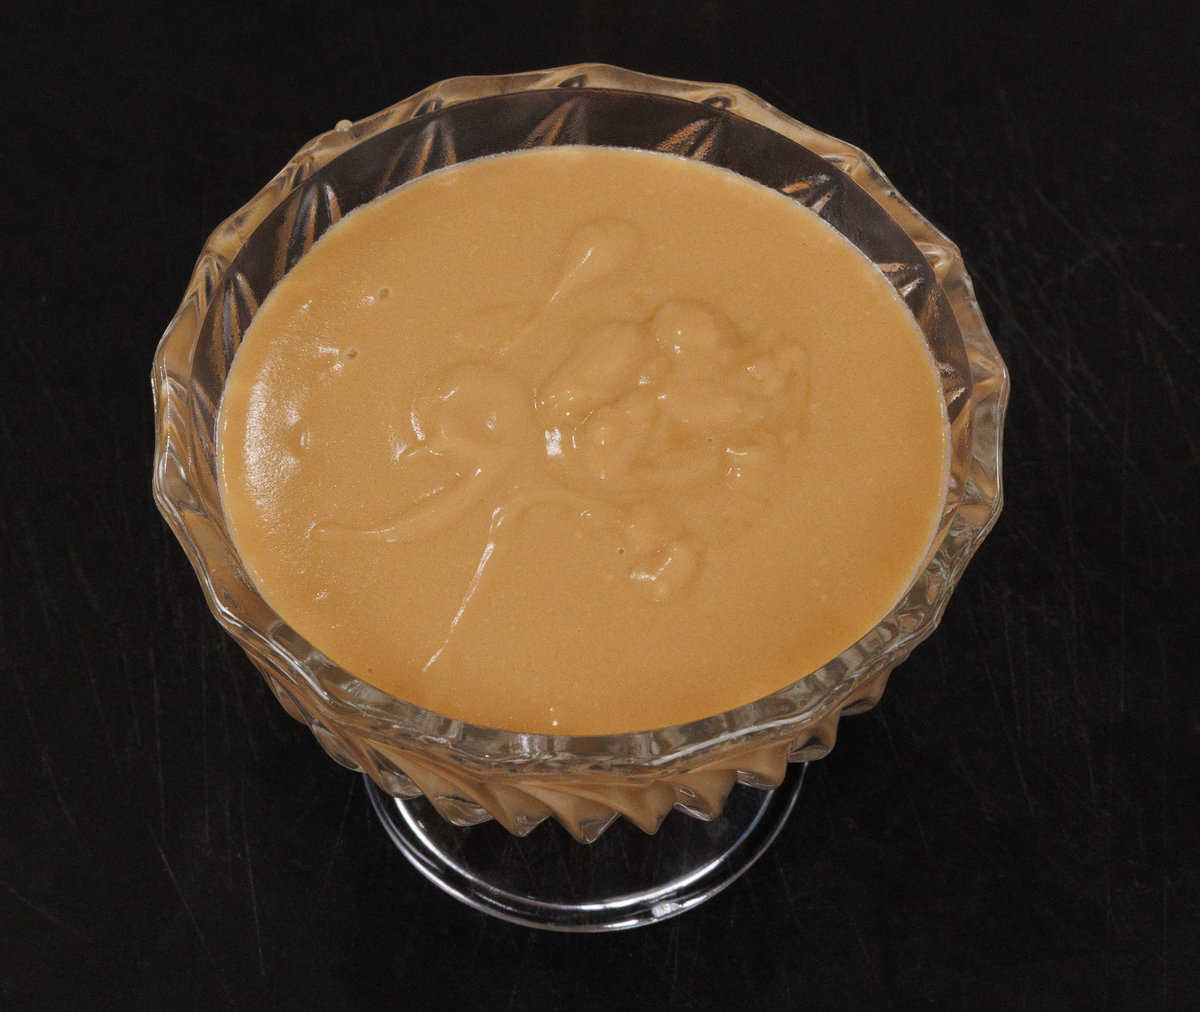 homemade butterscotch in a dessert bowl on a black table